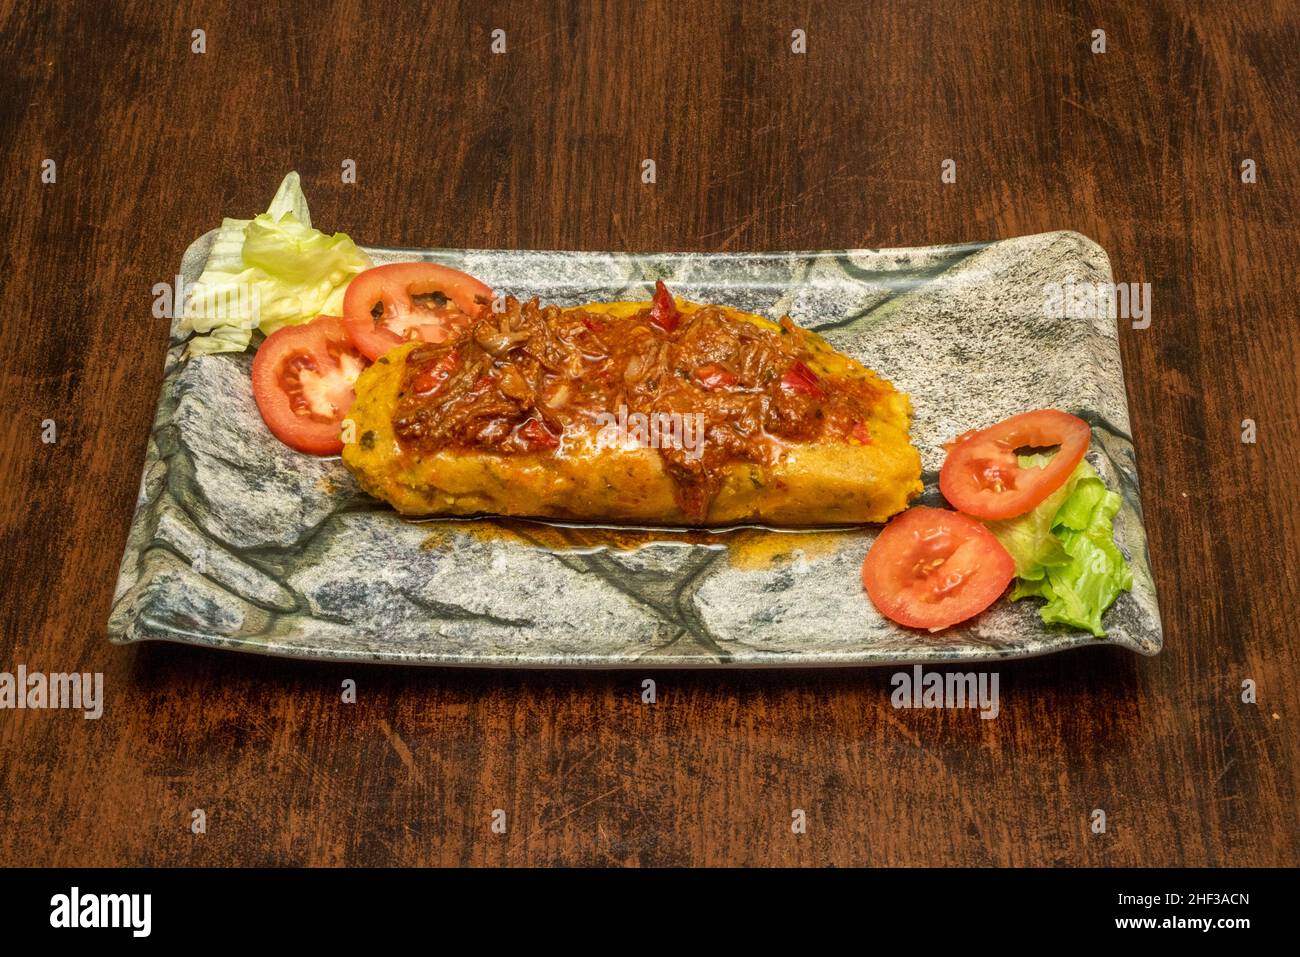 The tamale is a food of pre-Columbian origin, of Mesoamerican cultures, generally prepared based on corn dough or rice stuffed with meats, vegetables, Stock Photo